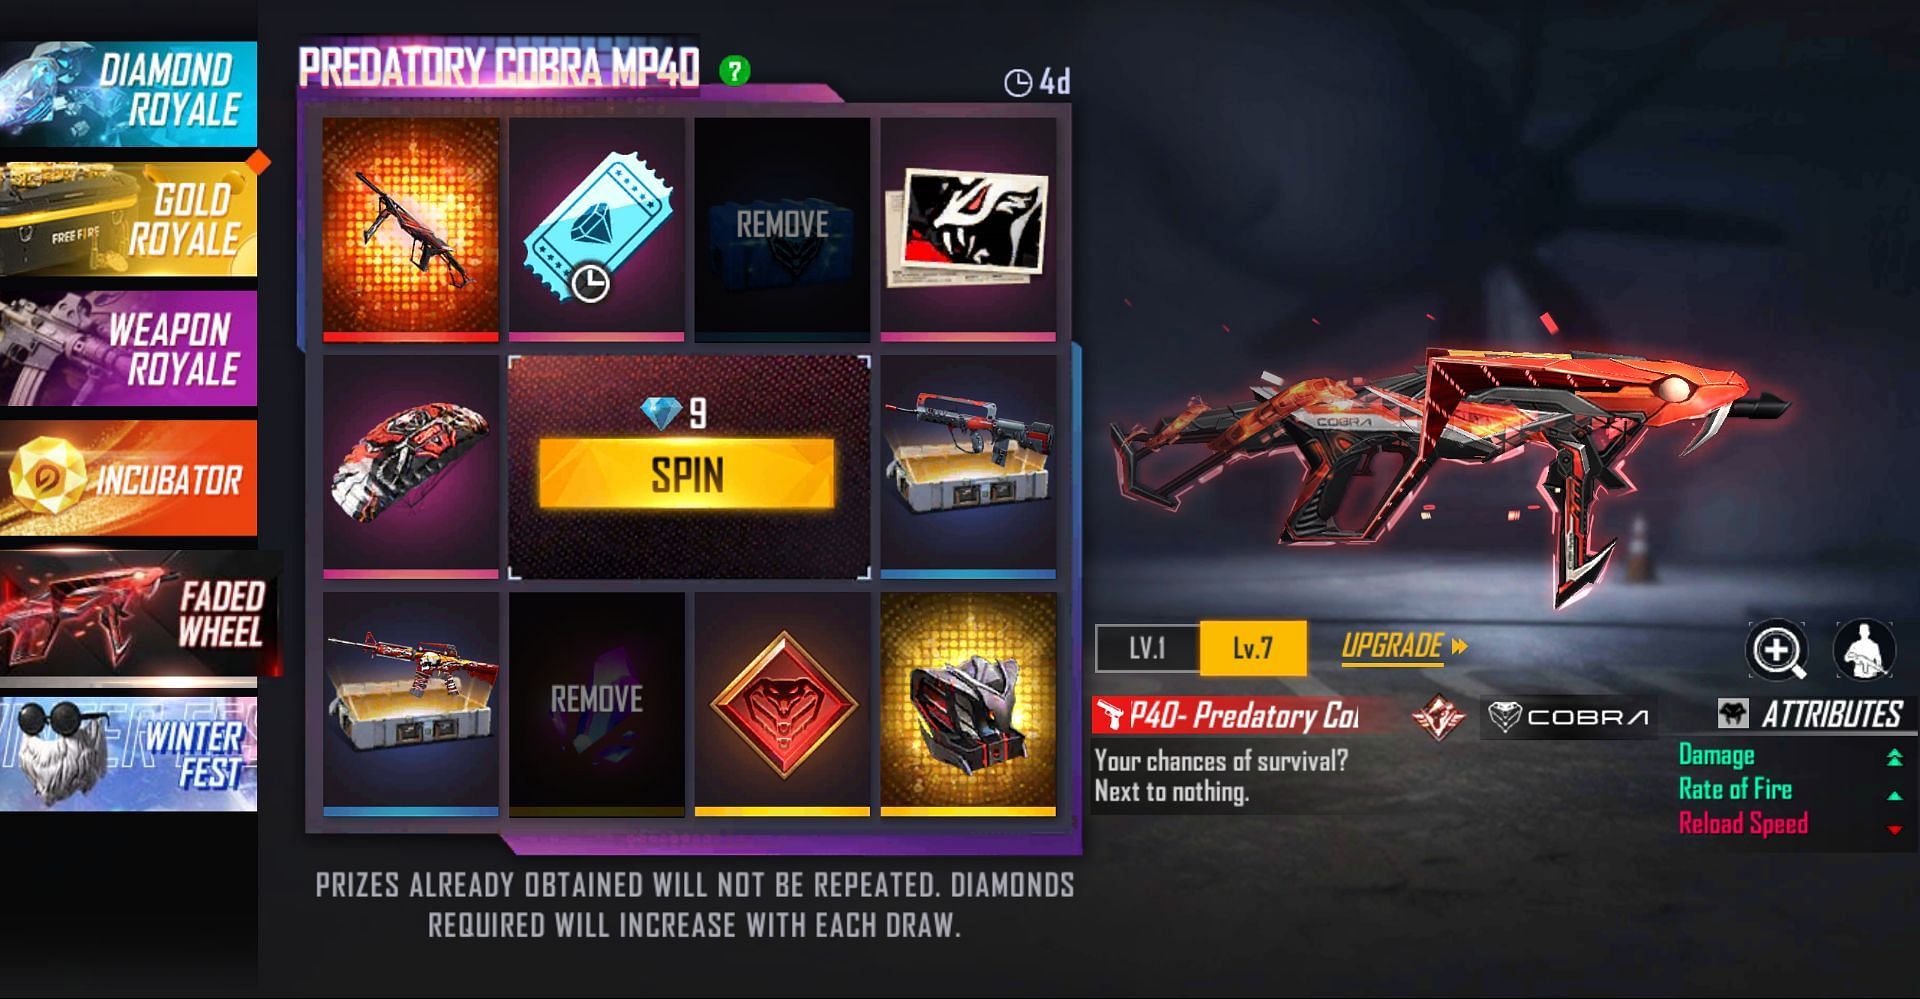 Currently, only one Faded Wheel is available, and users can wait for another one (Image via Free Fire)